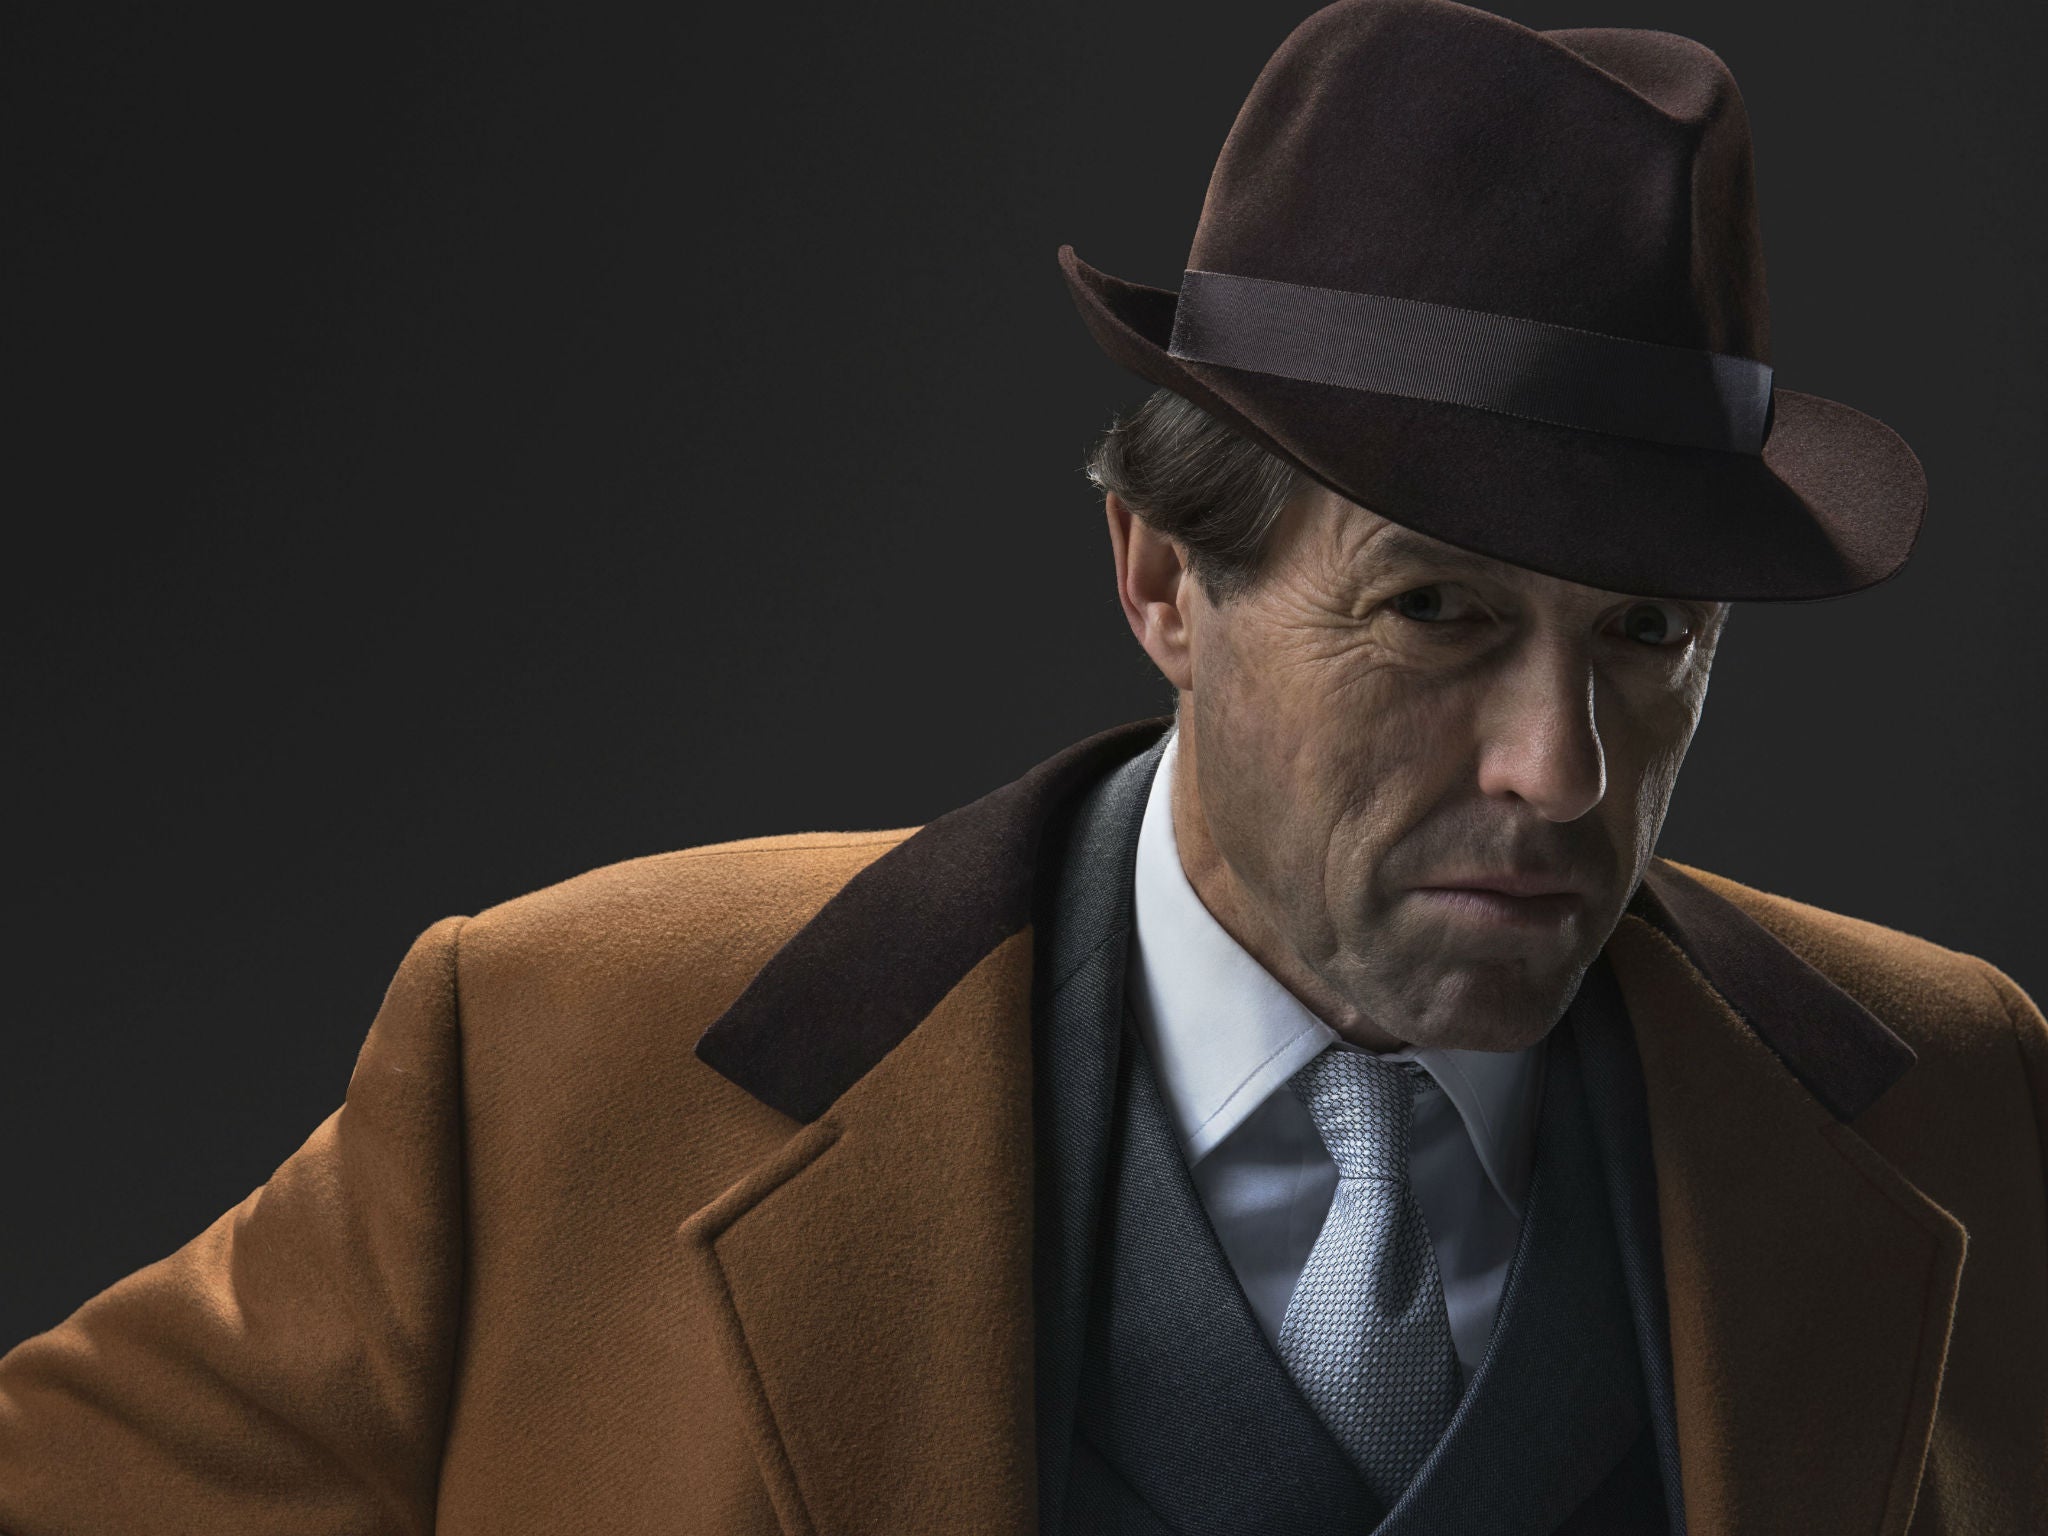 Hugh Grant as Jeremy Thorpe in the BBC's forthcoming A Very English Scandal